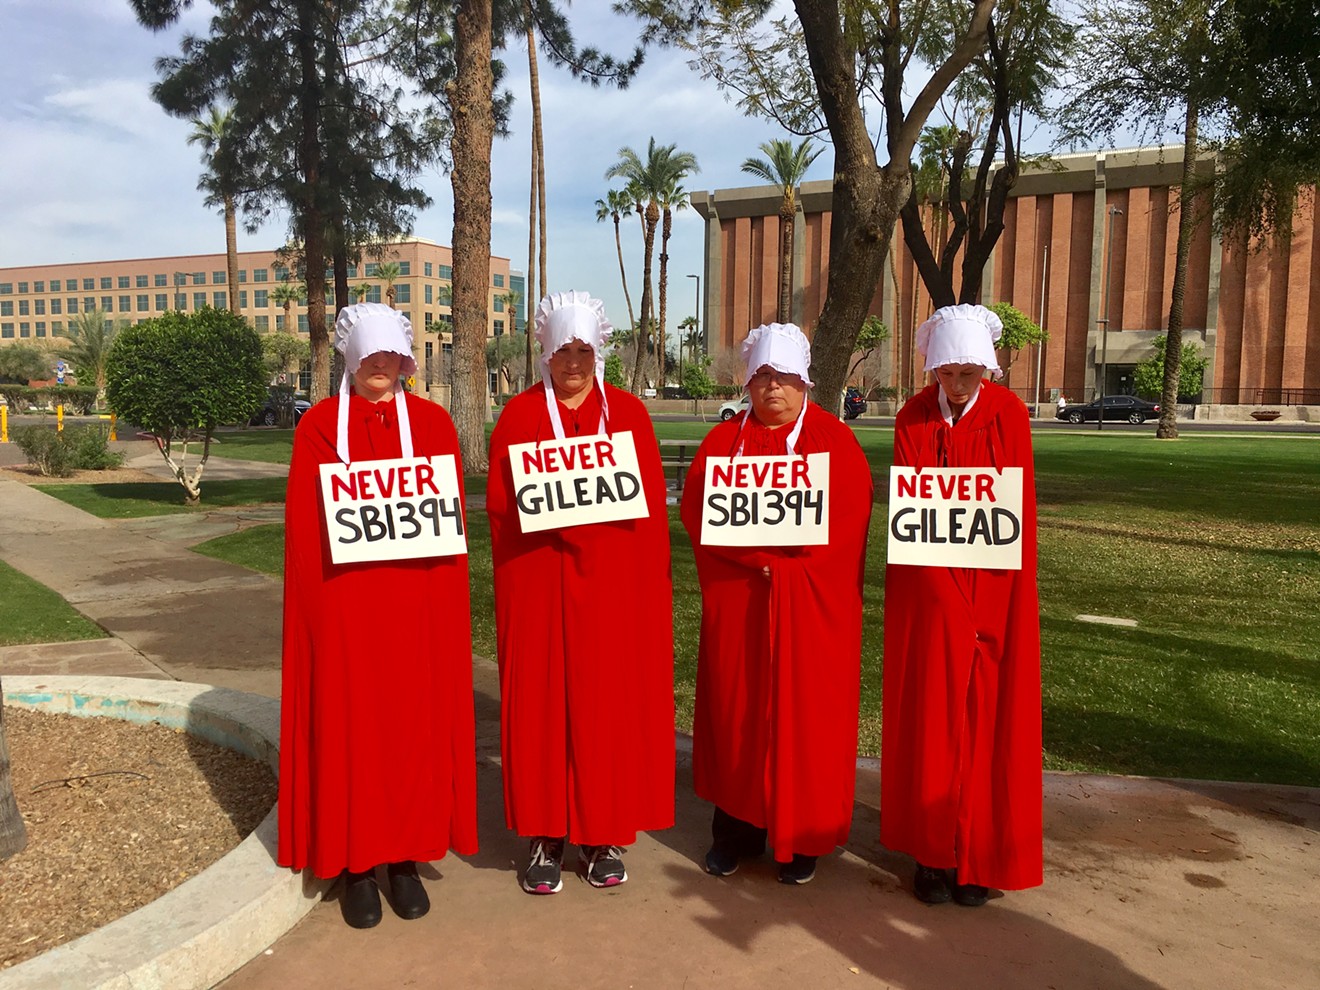 Reproductive rights activists, inspired by The Handmaid's Tale, protest SB 1394 outside the state capitol.